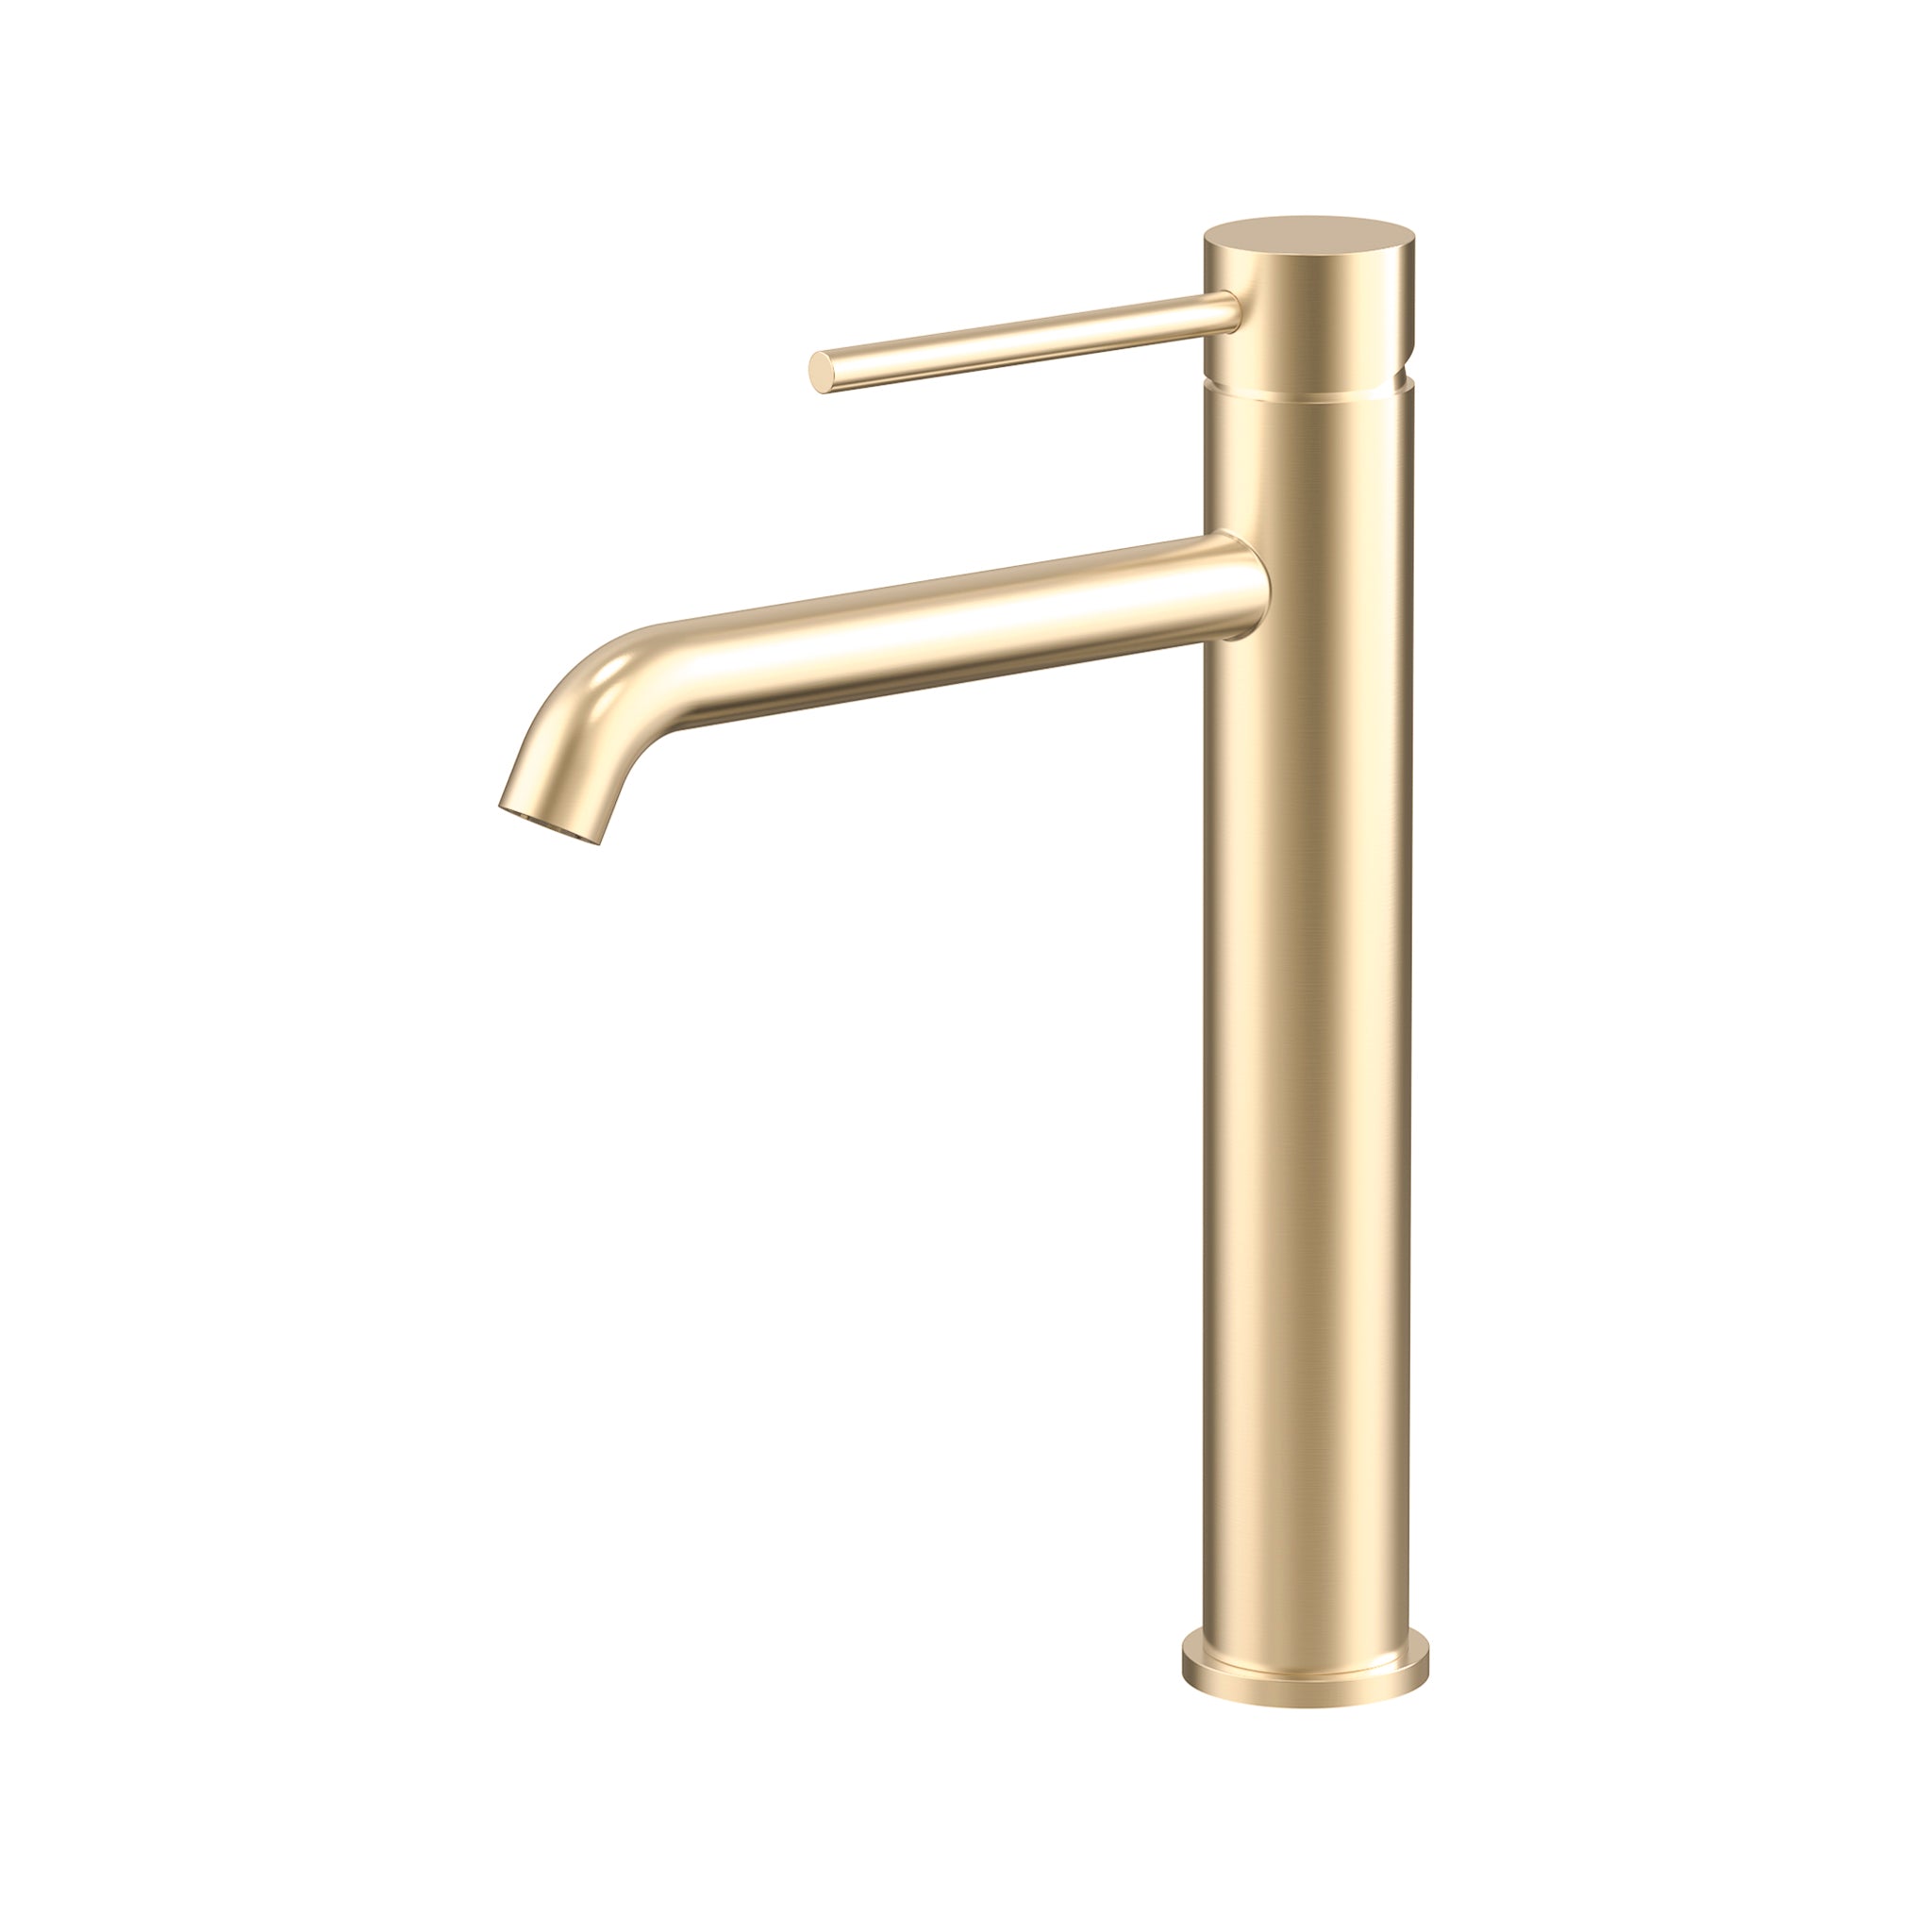 Profile III Tall Basin Mixer, PVD Brushed Brass Gold